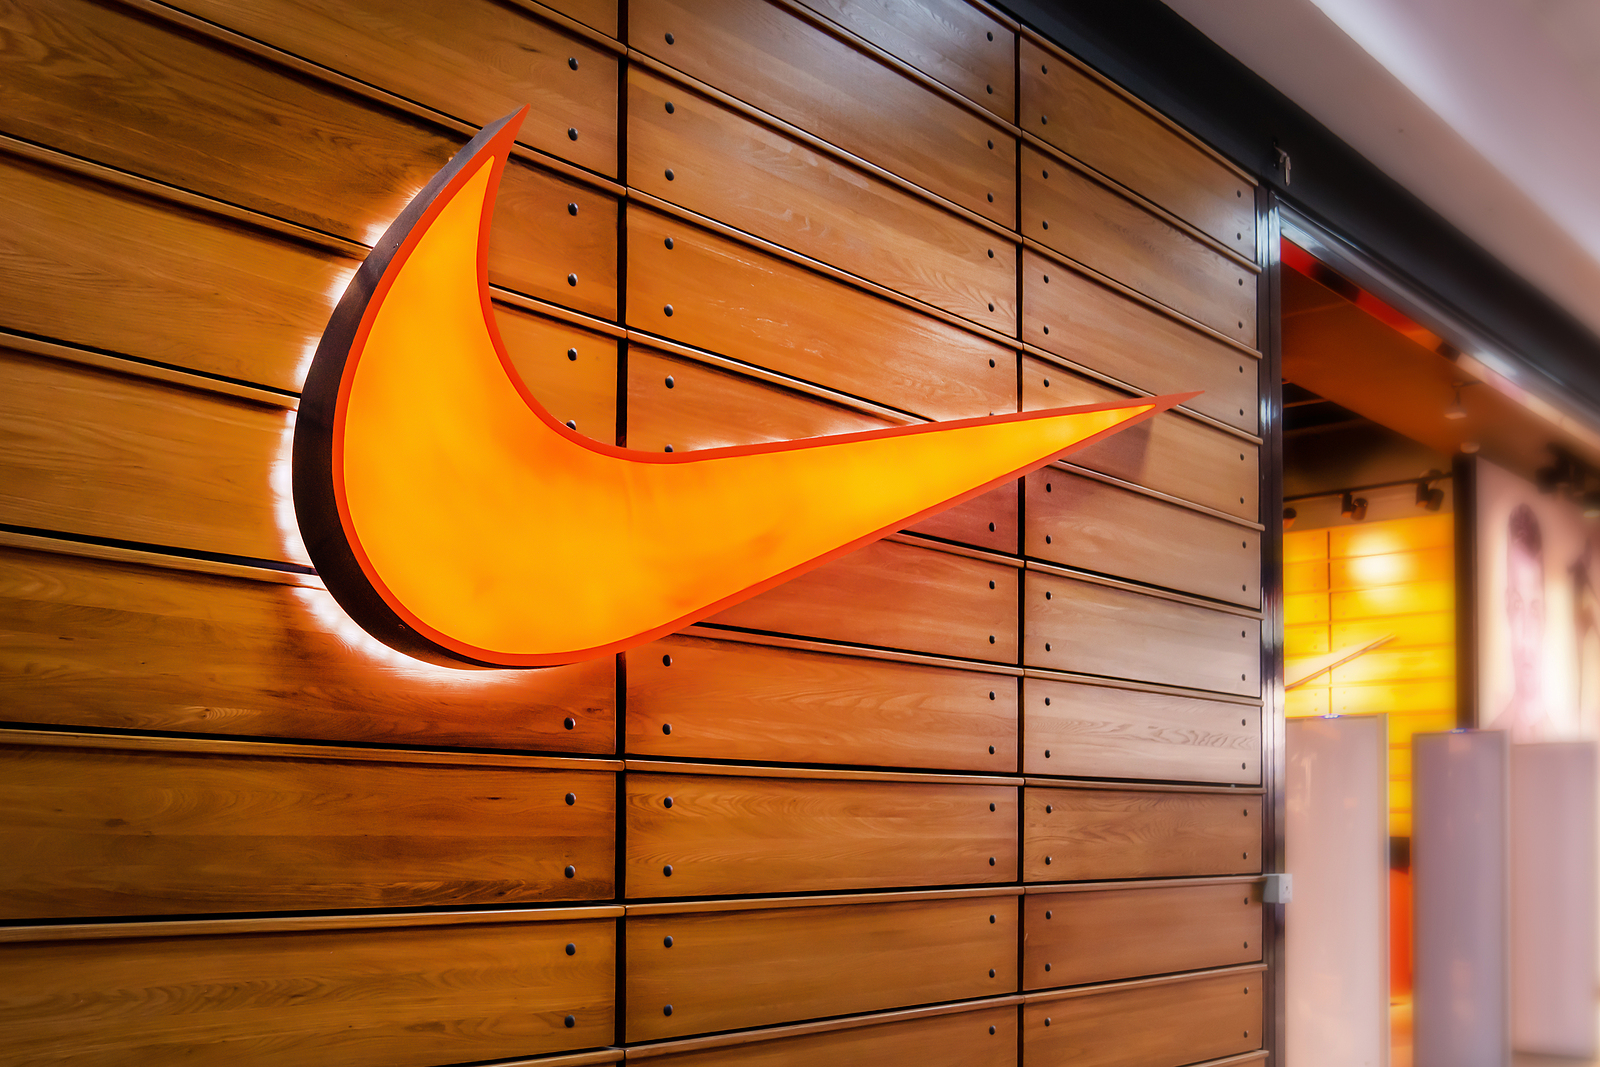 Nike Bombarded with Liens Totaling Over $100 Million